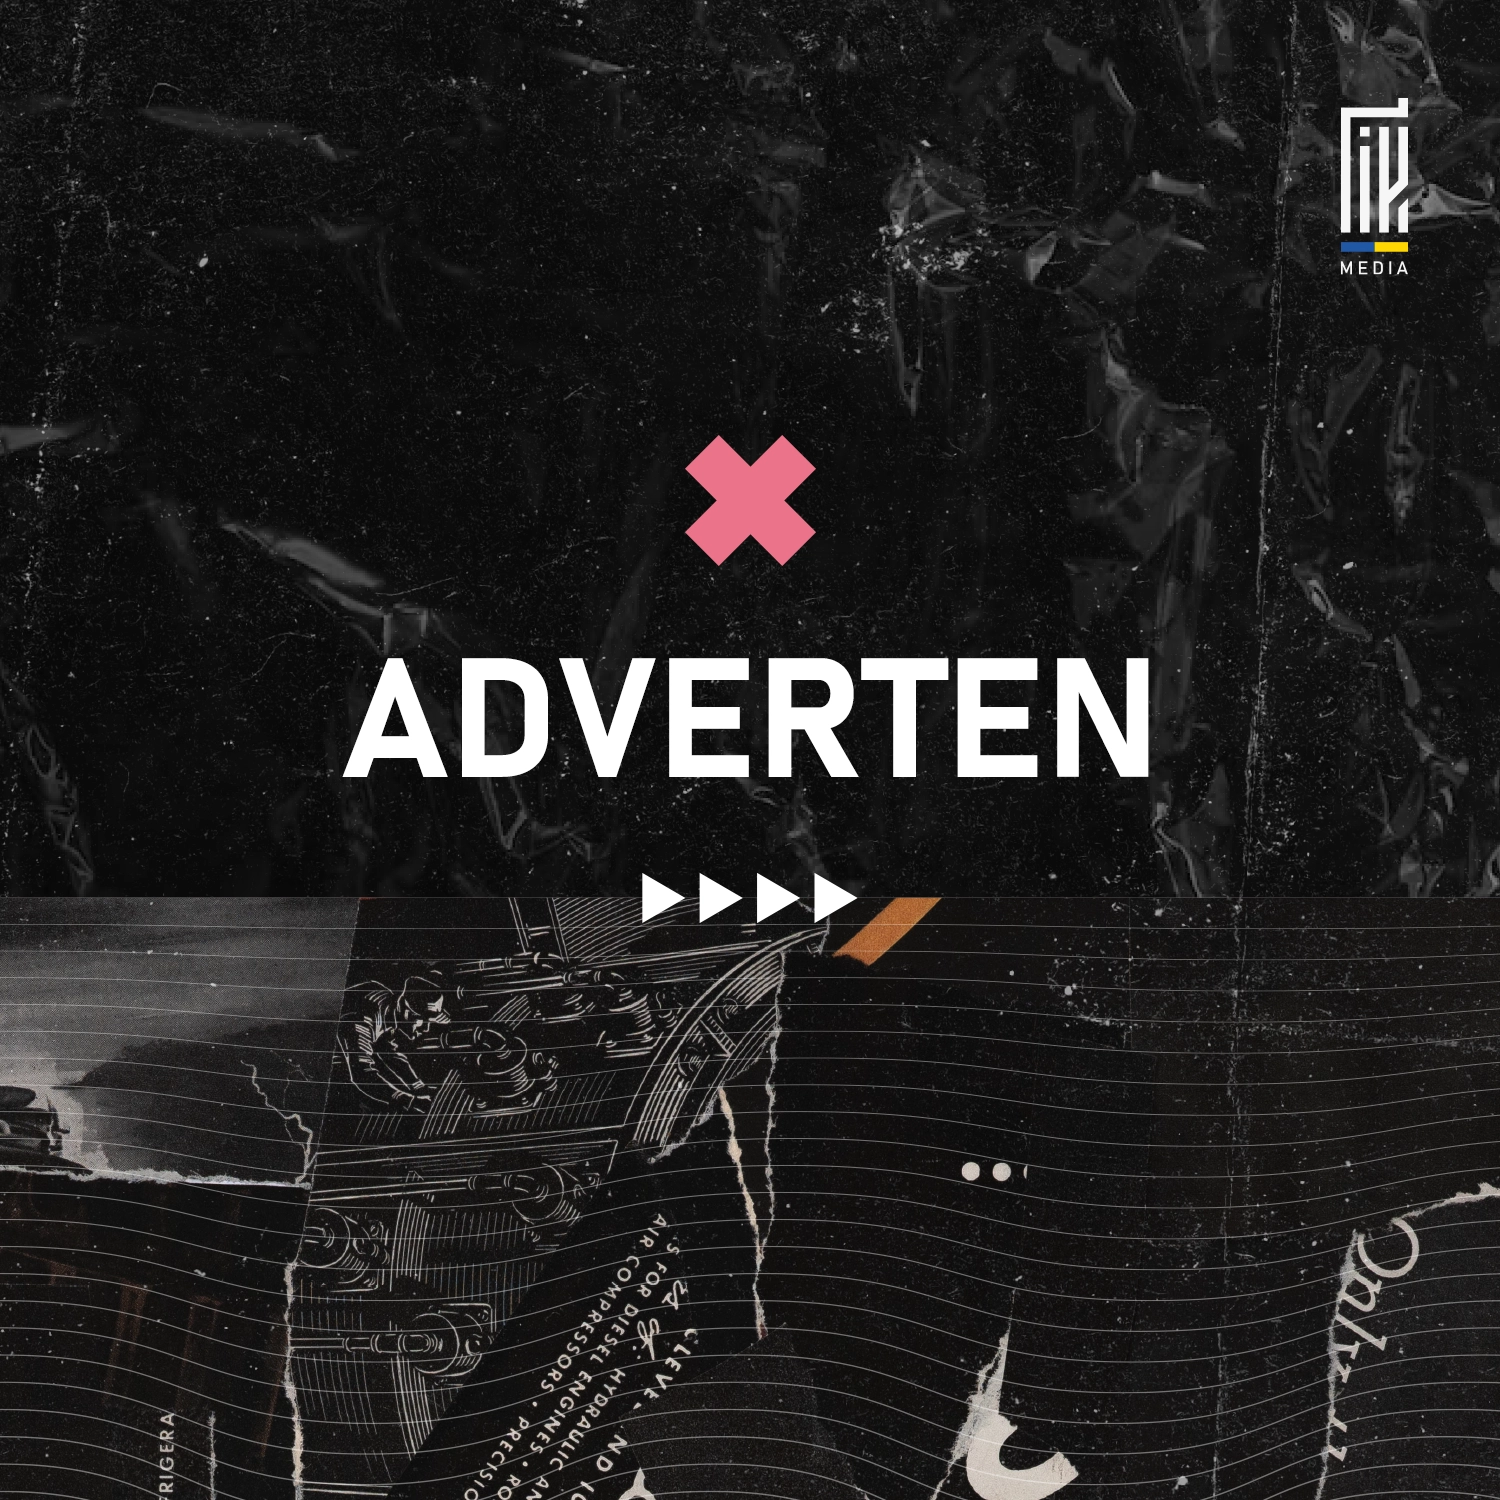 Square banner with 'ADVERTEN' in bold white letters and a coral cross symbol, against a textured black background, for en.uageek.media's affiliate marketing program.